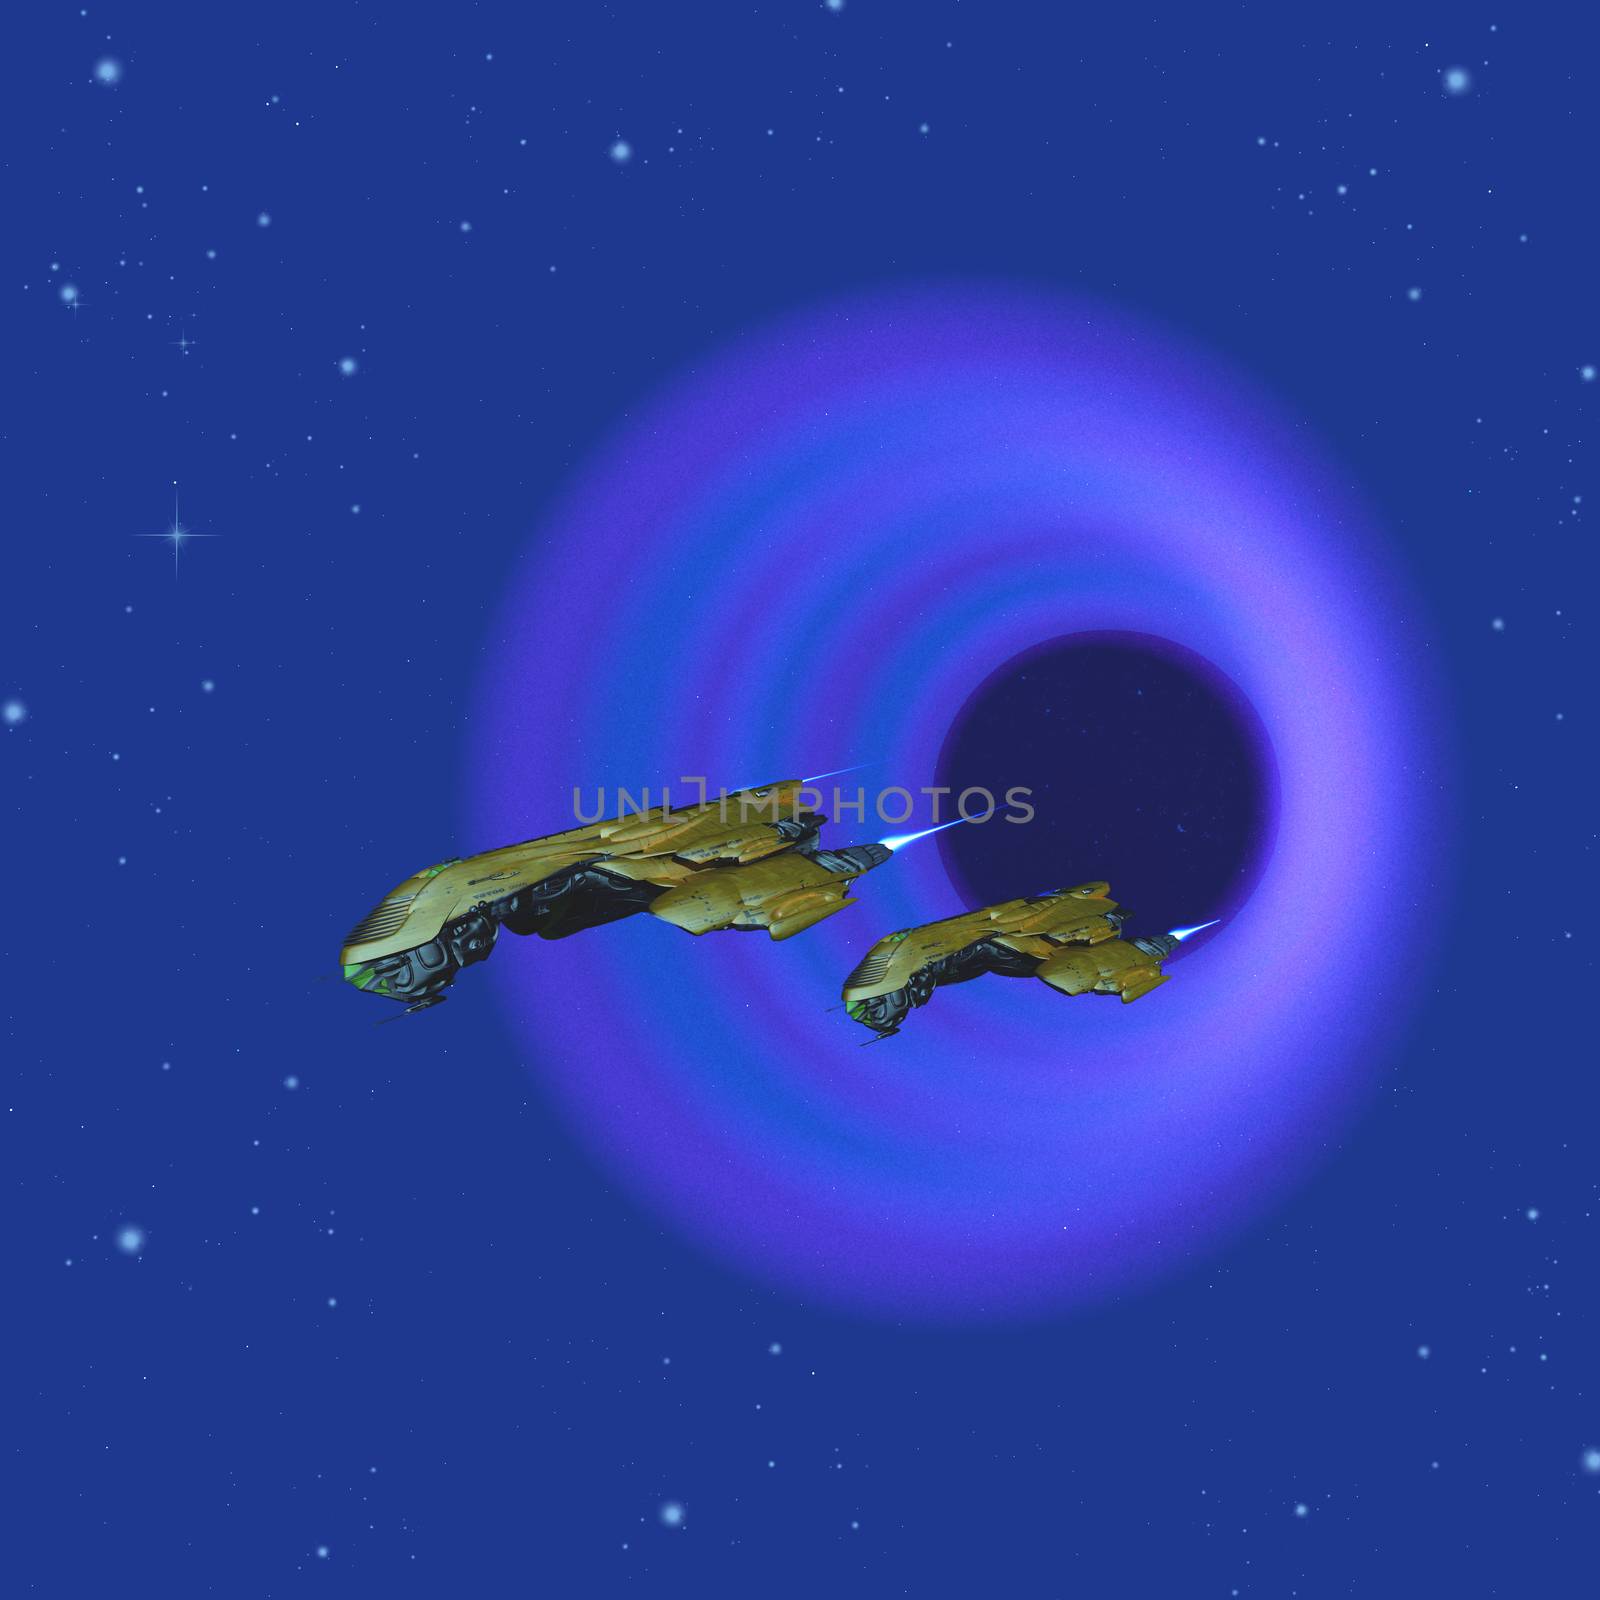 Two spacecraft come through a wormhole in space on their journey to a different galaxy in the universe.